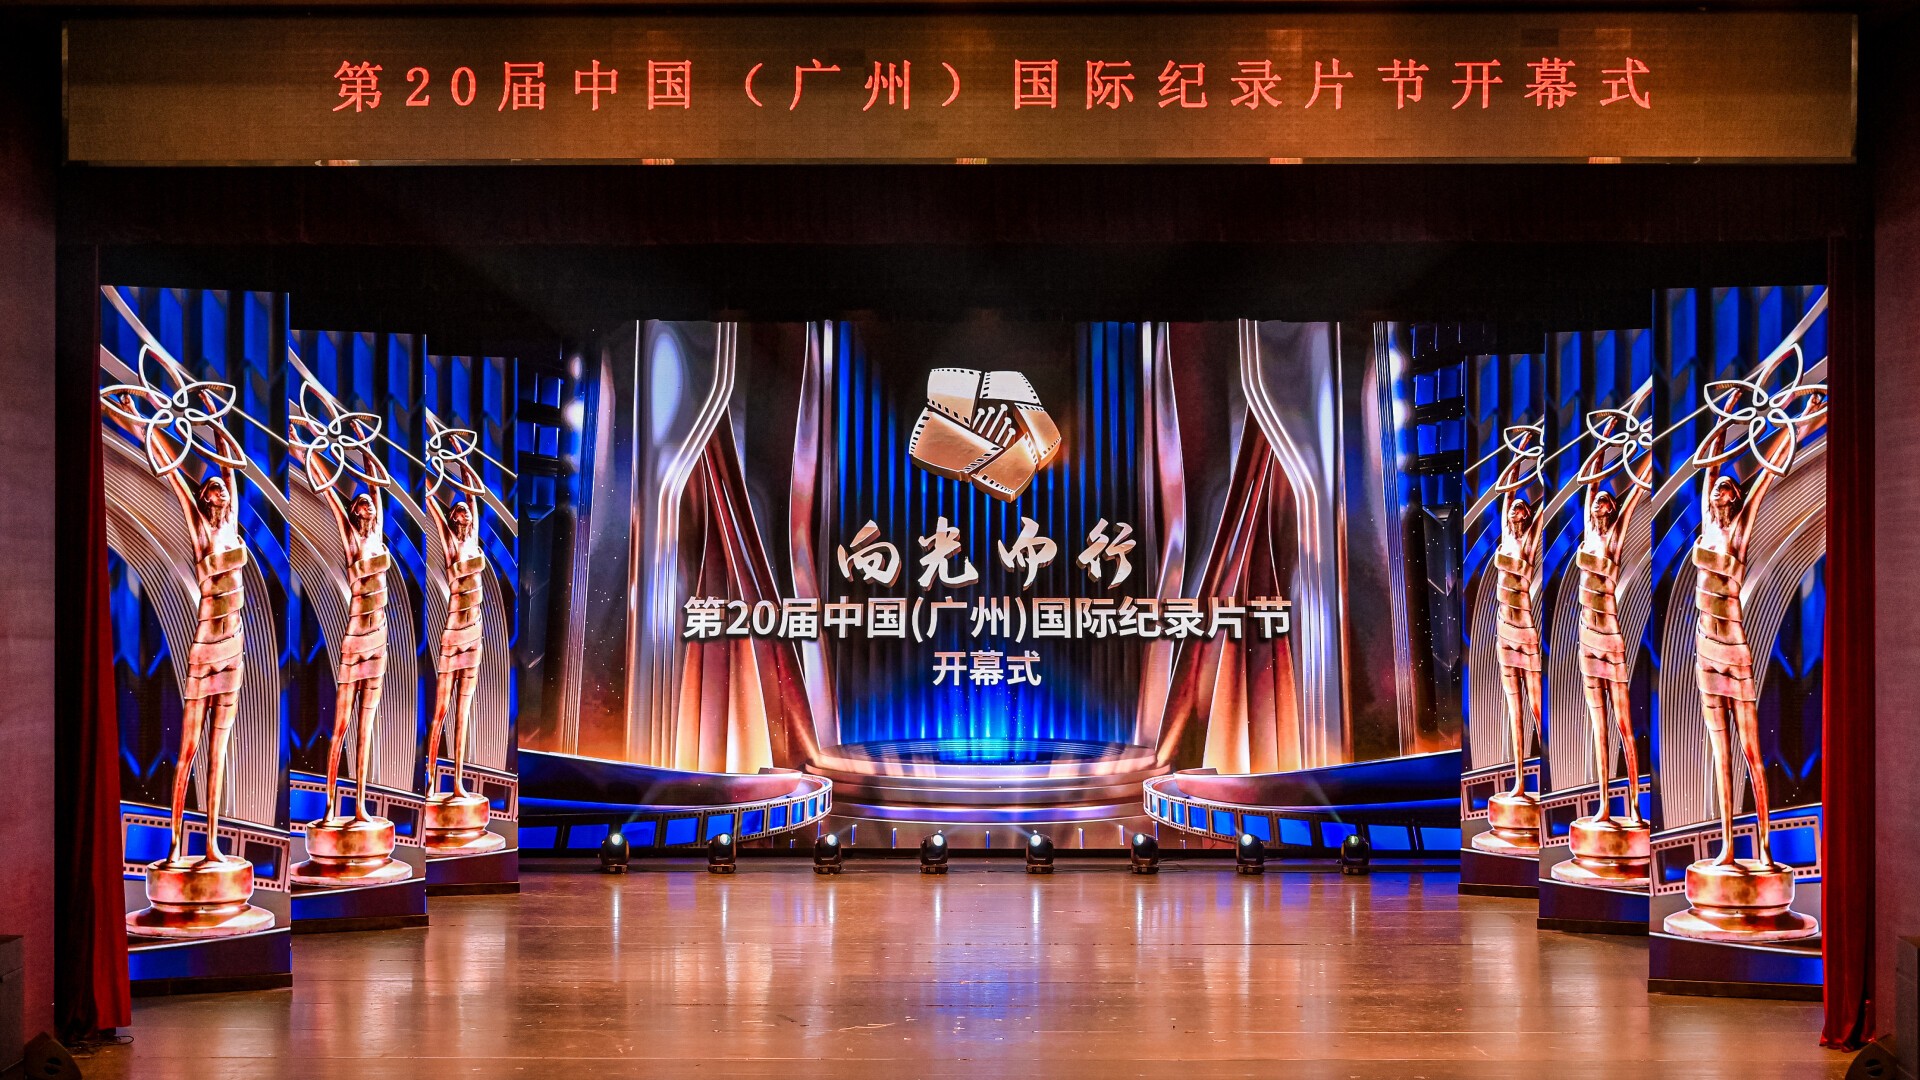 Int'l Documentary Film Festival kicks off in Guangzhou, experts eye global collaboration